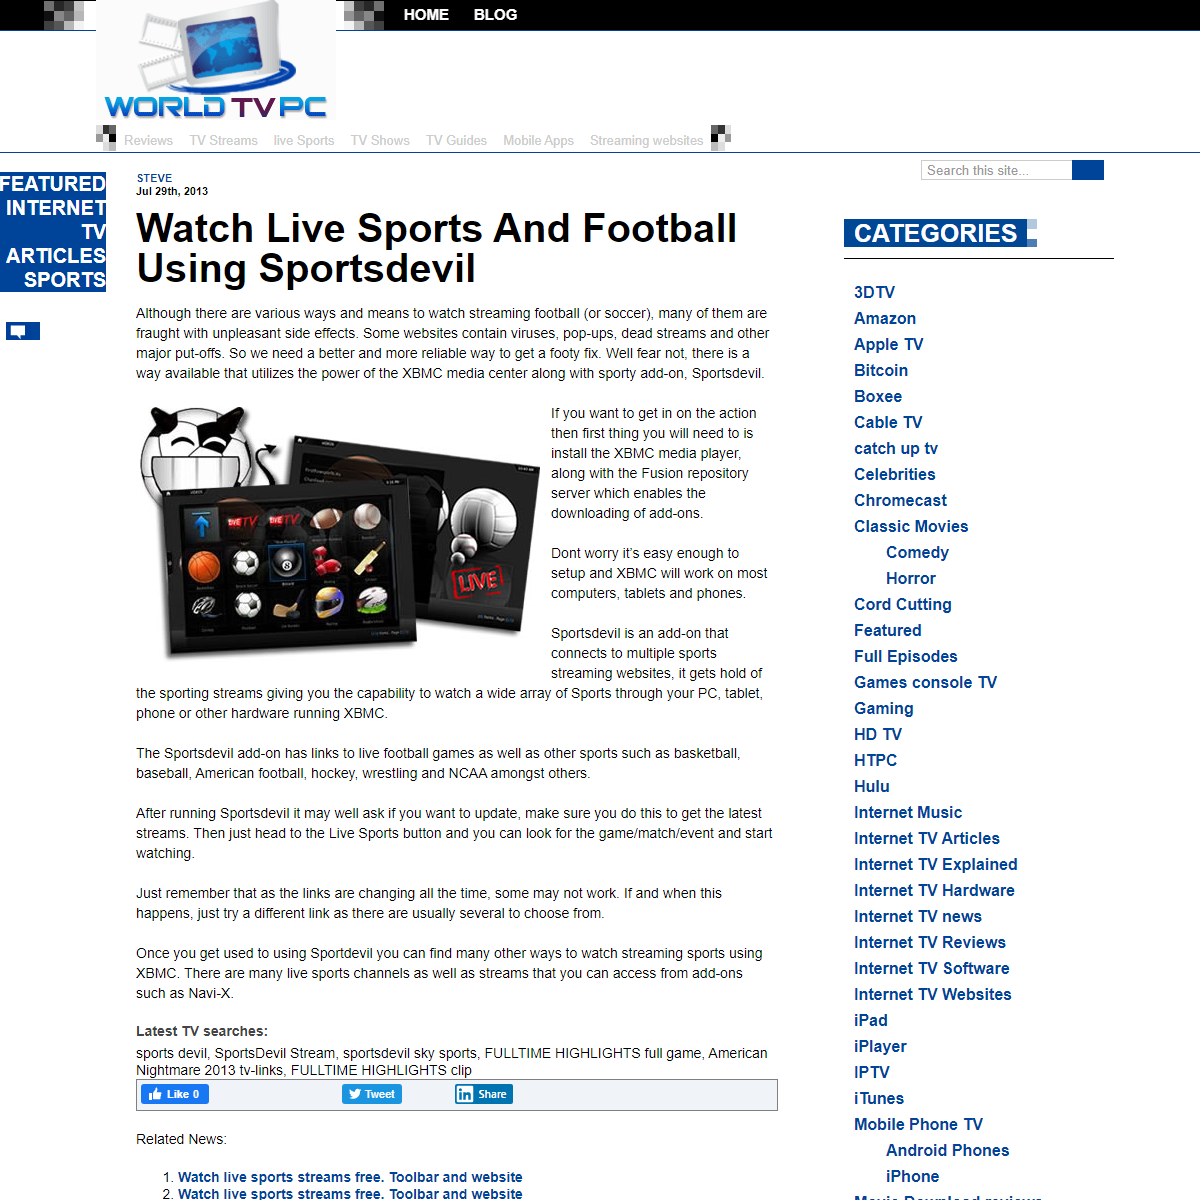 A complete backup of https://www.worldtvpc.com/blog/watch-live-sports-and-football-streaming-using-sportsdevil/